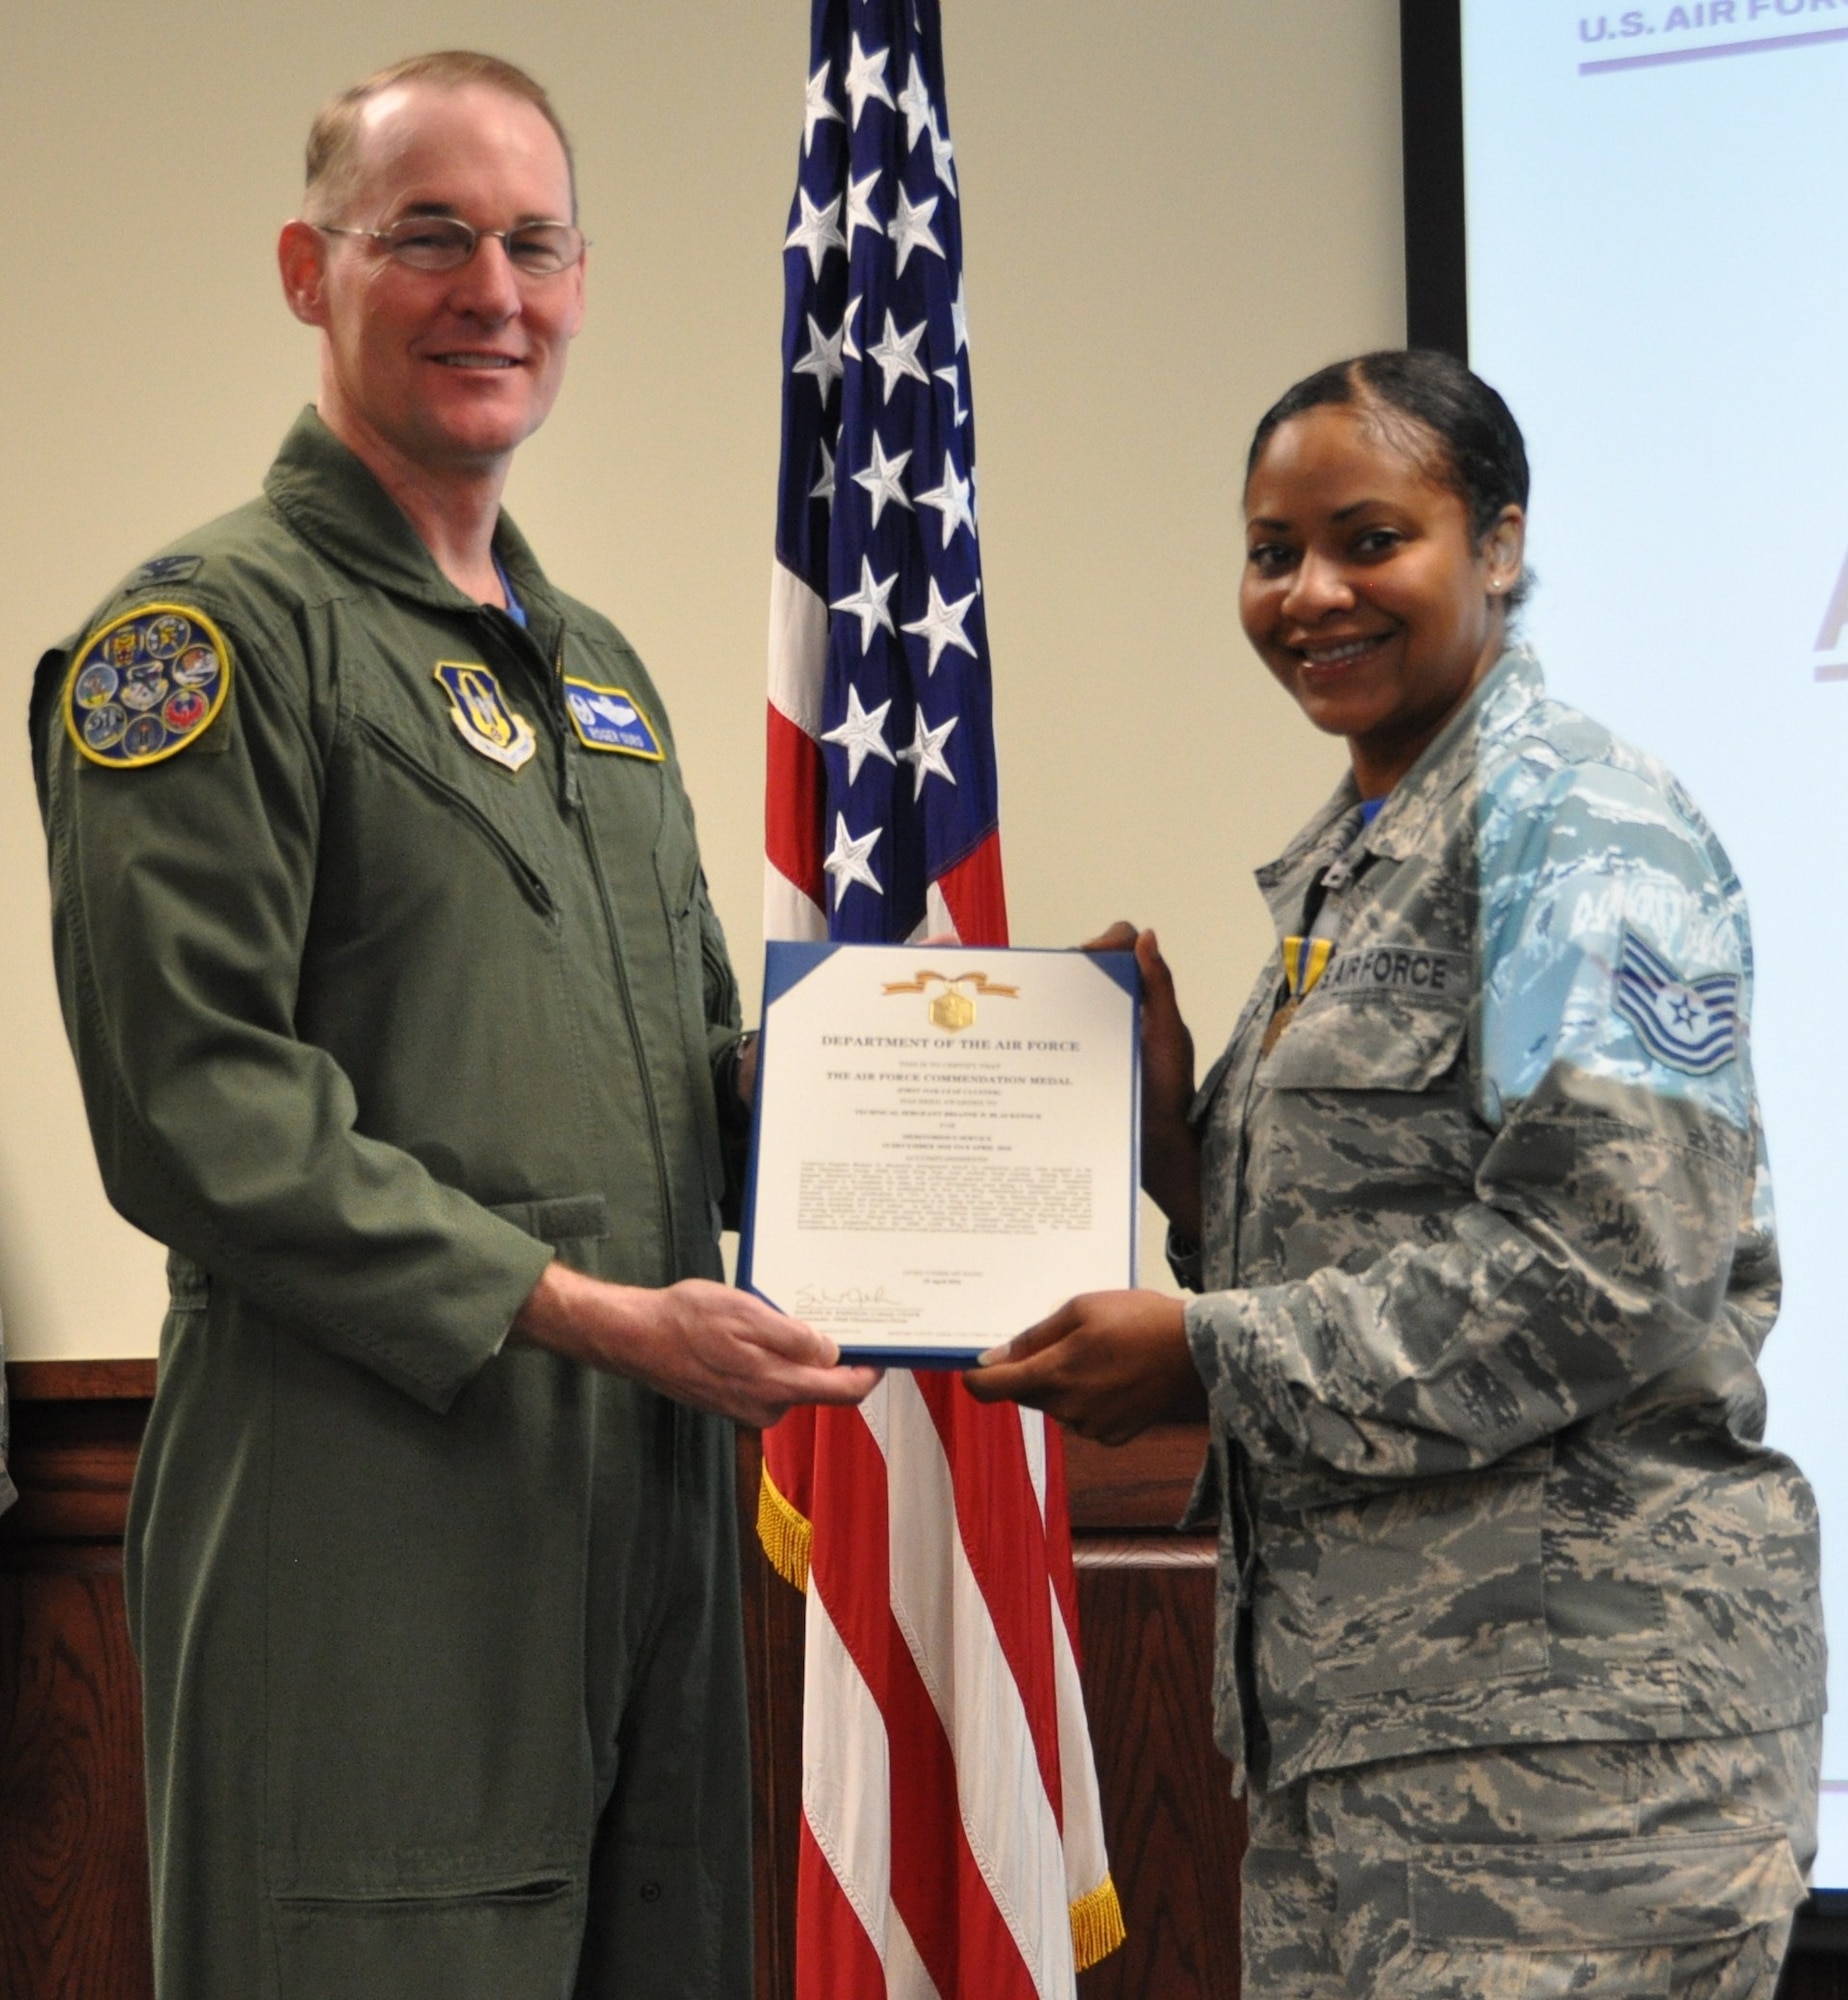 Tech. Sgt. Brianne Blackstock receives an Air Force Commendation Medal from 340th FTG commander, Col. Roger Suro  at the Group's MUTA held Dec. 1-2 at Joint Base San Antonio-Randolph, Texas (Photo by Janis El Shabazz).